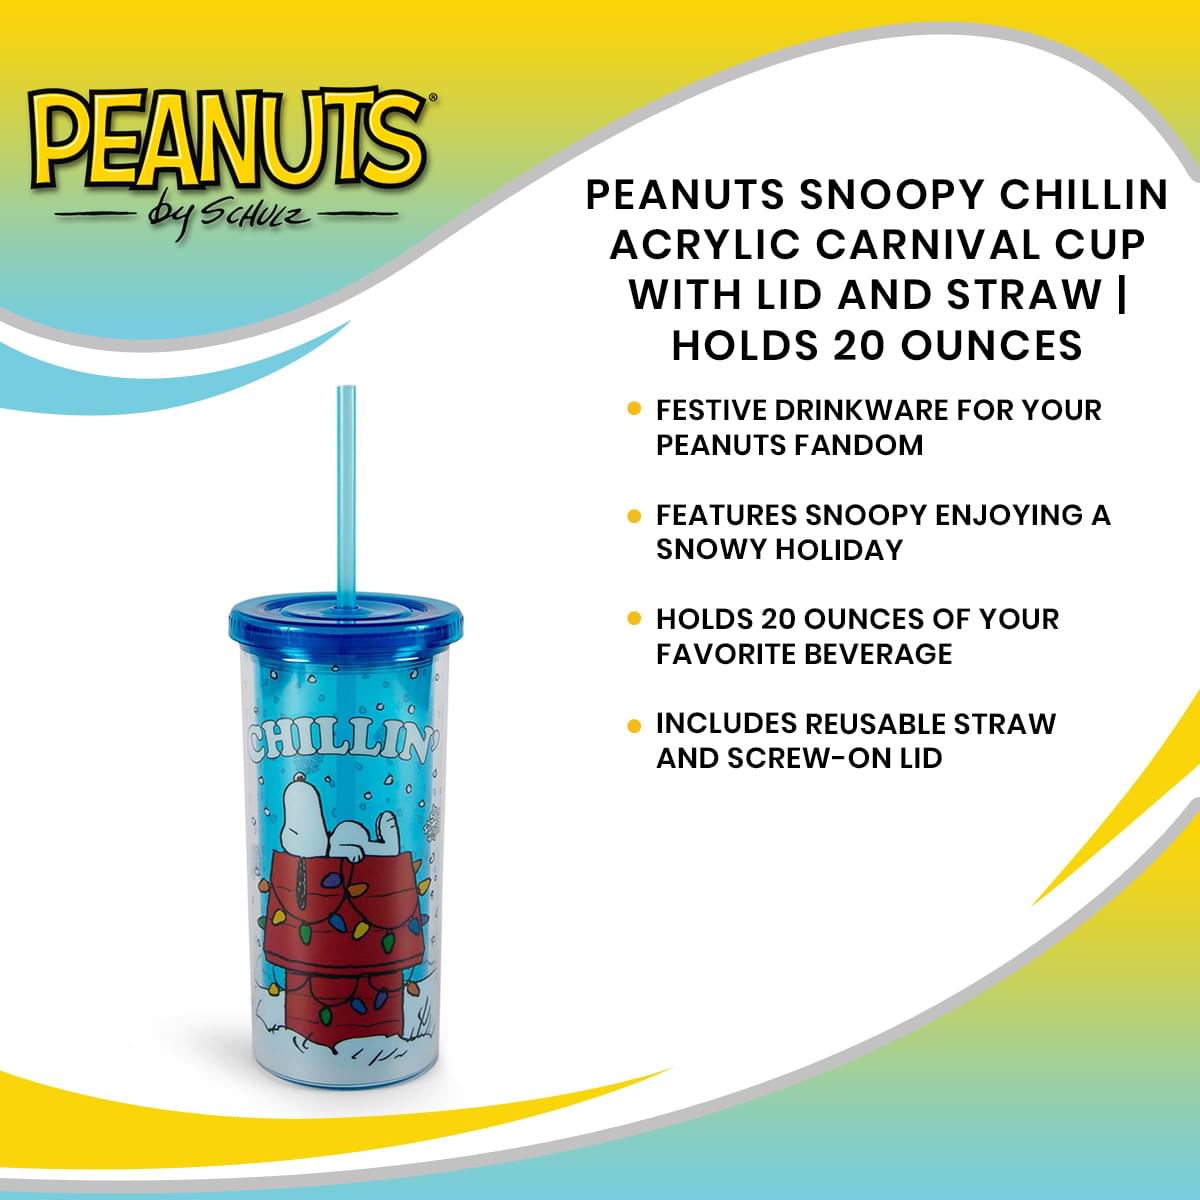 Peanuts Snoopy Chillin Acrylic Carnival Cup with Lid and Straw | Holds 20 Ounces